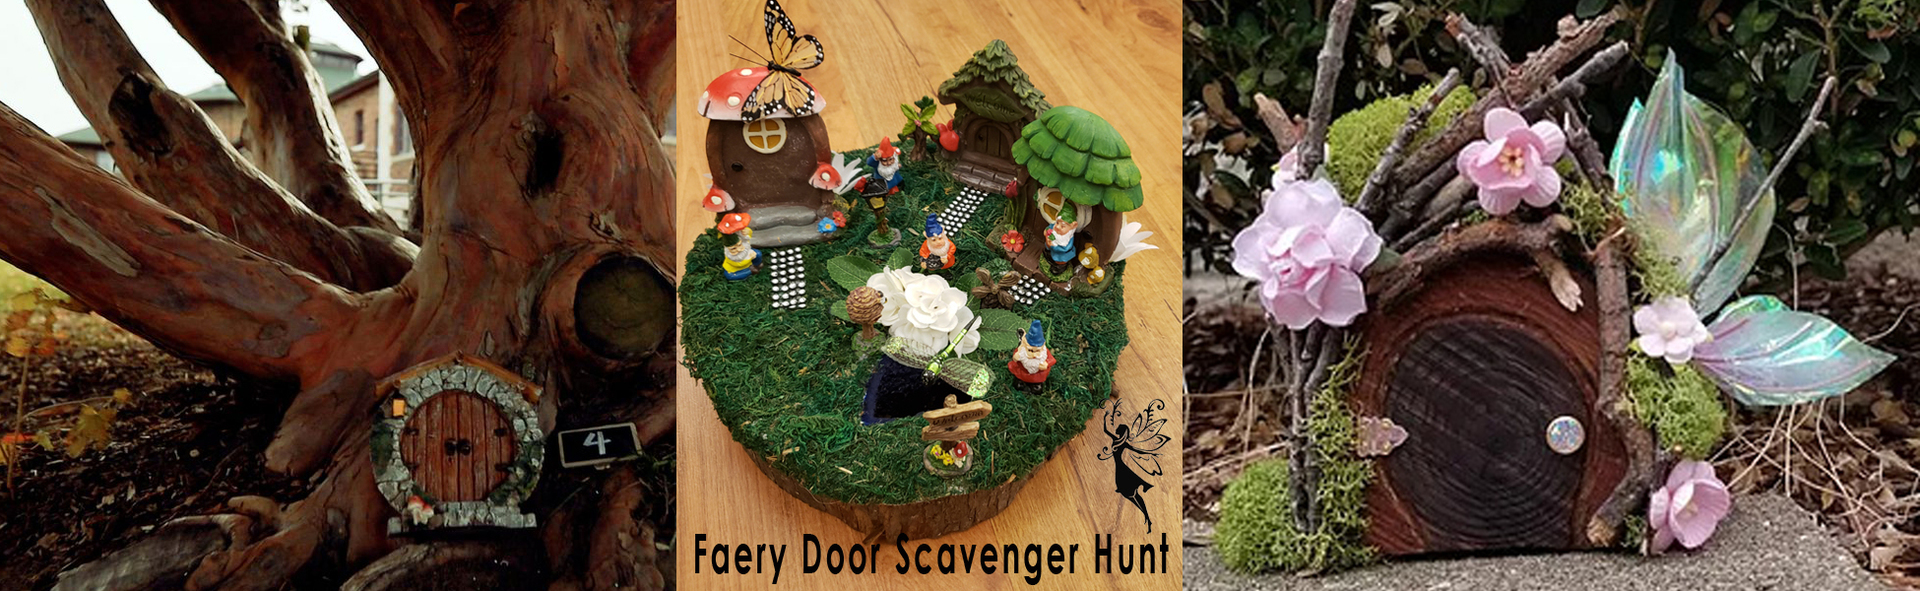 Faery Door Scavenger Hunt: All Ages Pre-Event for Faery Court Masquerade Ball, Biloxi, Mississippi, United States